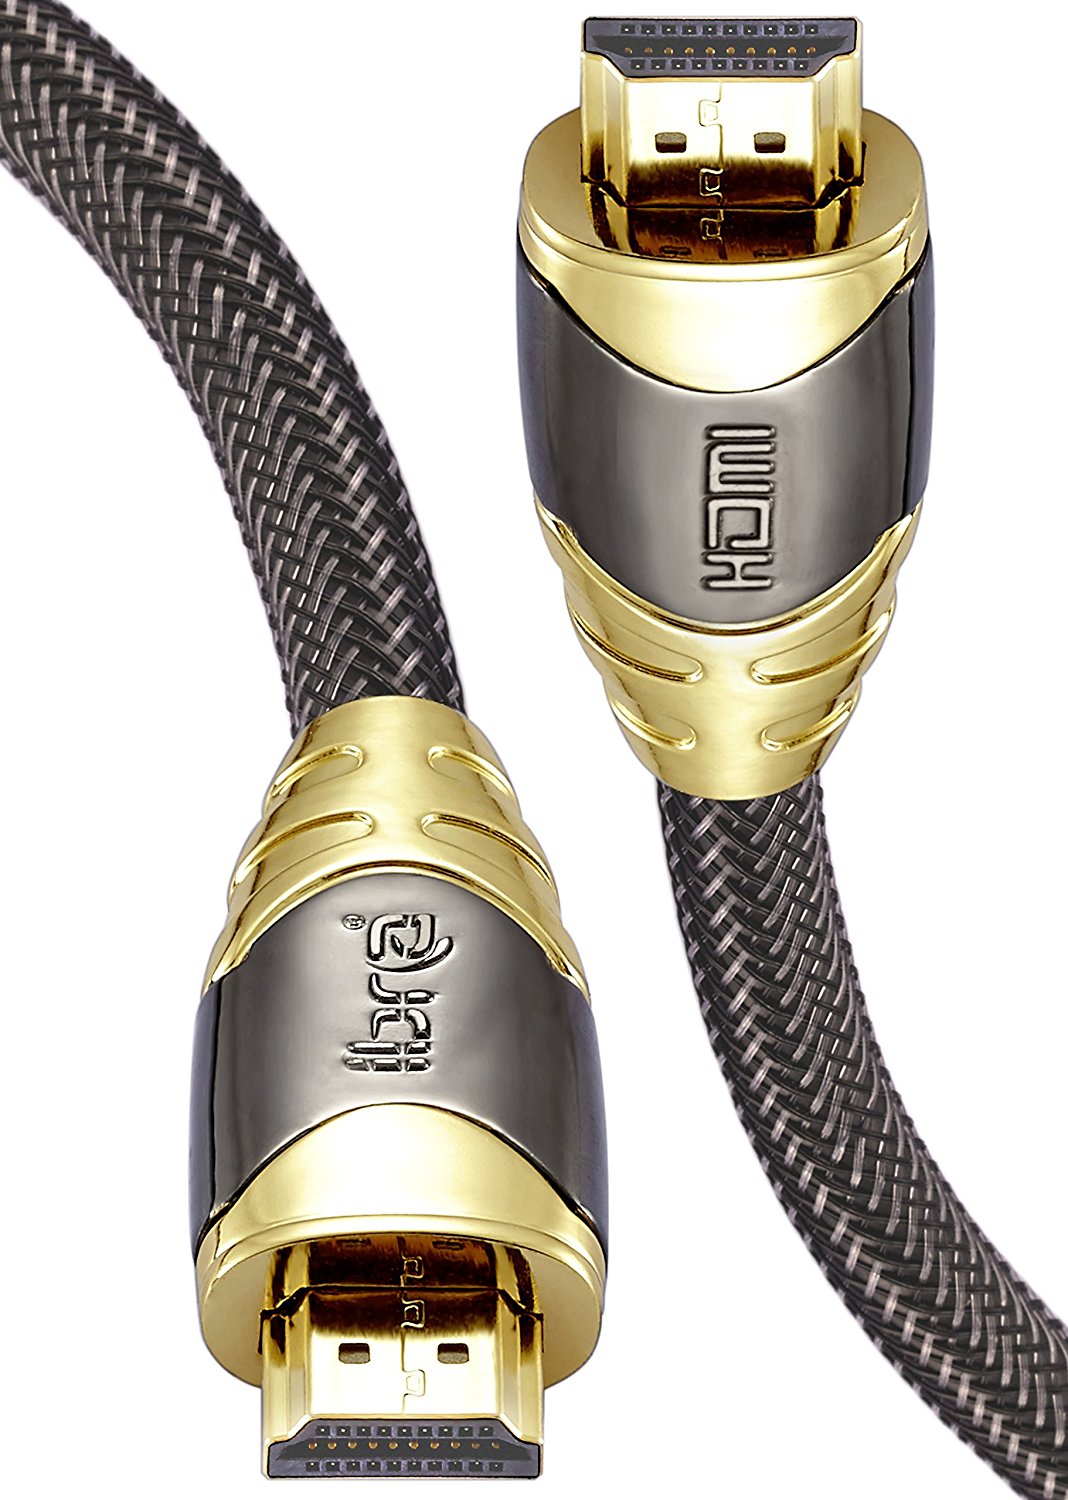 HDMI Cable 7M - HDMI 2.0 (4K@60Hz) Ready - 28AWG Braided Cord - 18Gbps -Gold Plated Connectors - Ethernet, Audio Return - Video 4K 2160p HD 1080p 3D Xbox PlayStation PS3 PS4 PC Apple TV – IBRA LUXURY